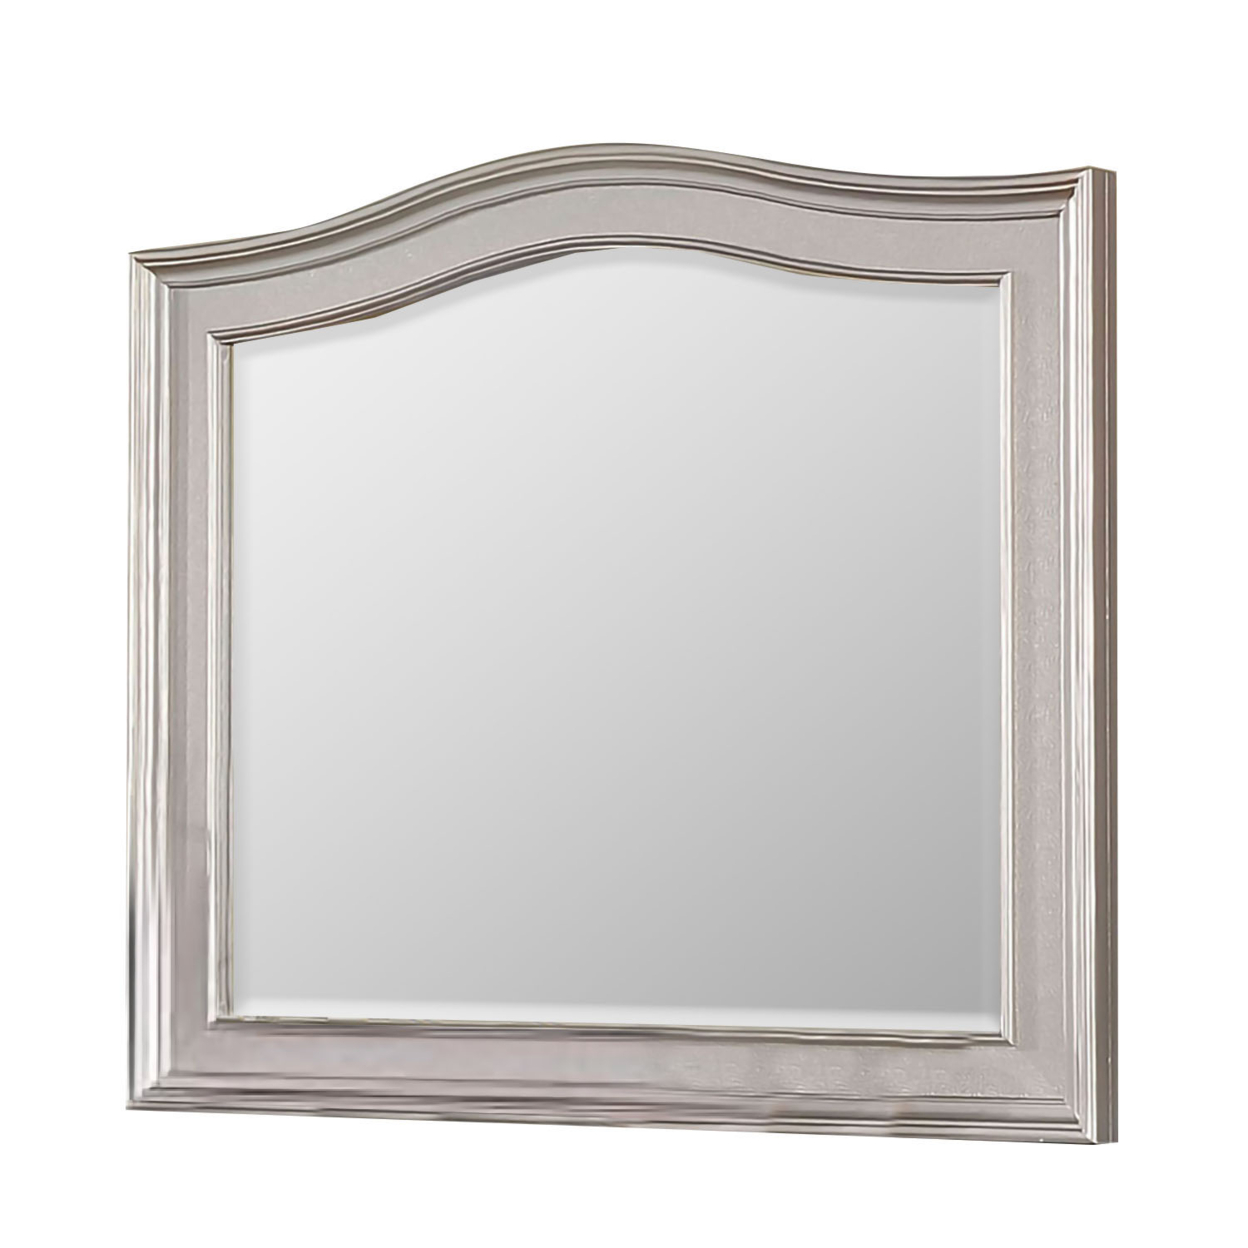 Curved Top Wooden Frame Mirror With Molded Details, Silver- Saltoro Sherpi